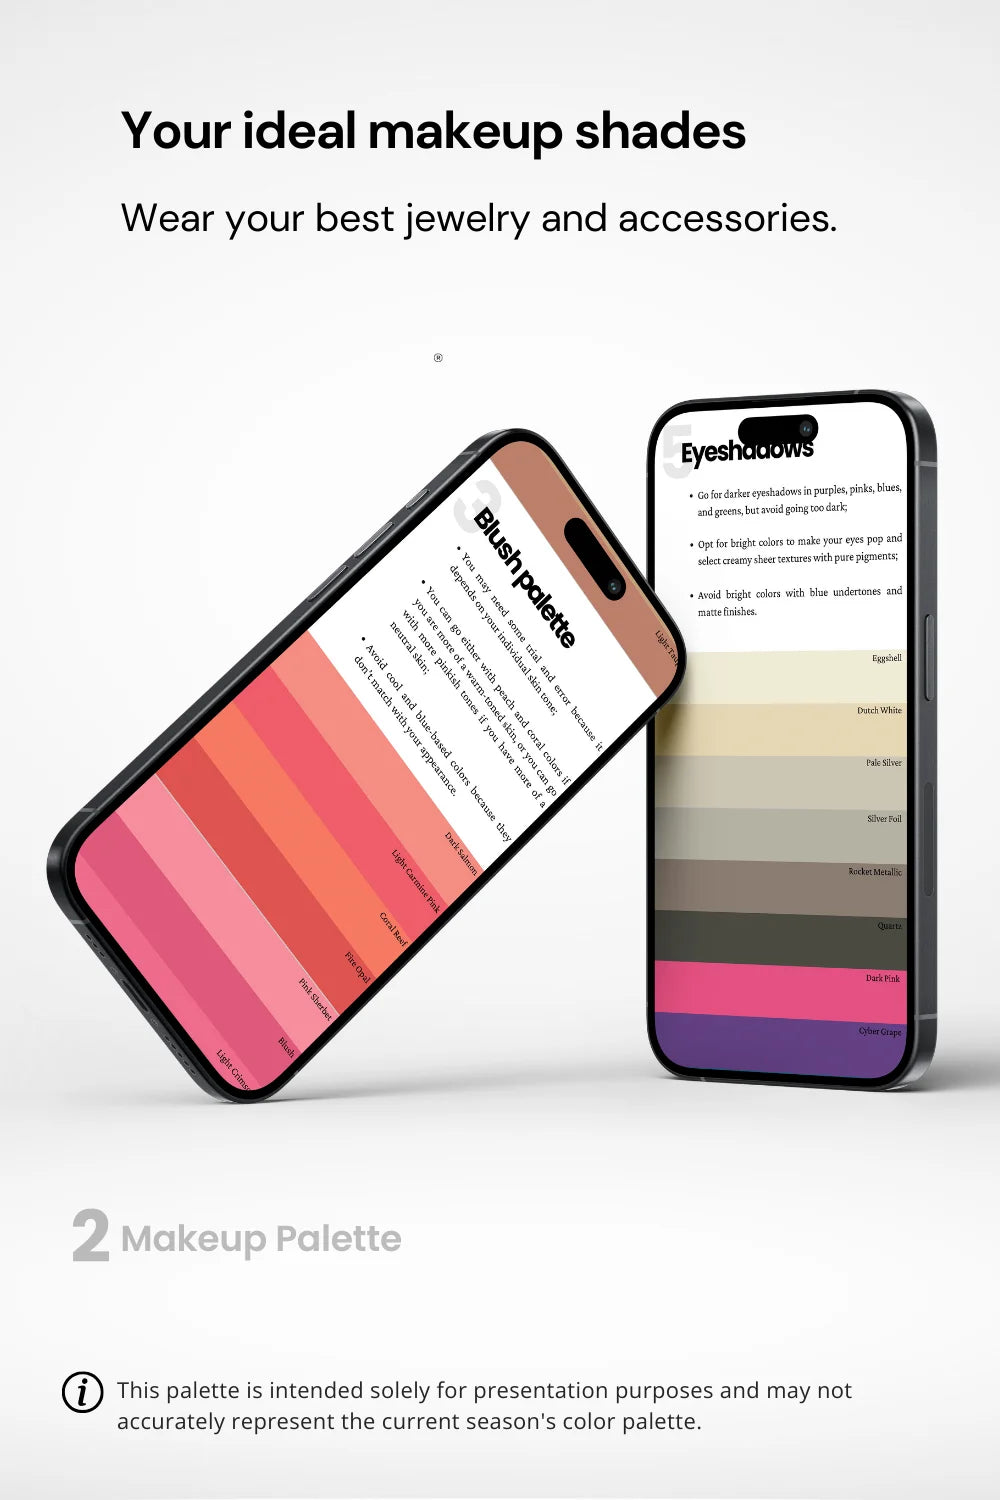 Two phones demonstrating the use of the Makeup Palette from the True Winter Palette Pack, with tips for matching makeup shades. Titled 'Your Ideal Makeup Shades', and a subtitle suggesting pairing with your best jewelry and accessories.